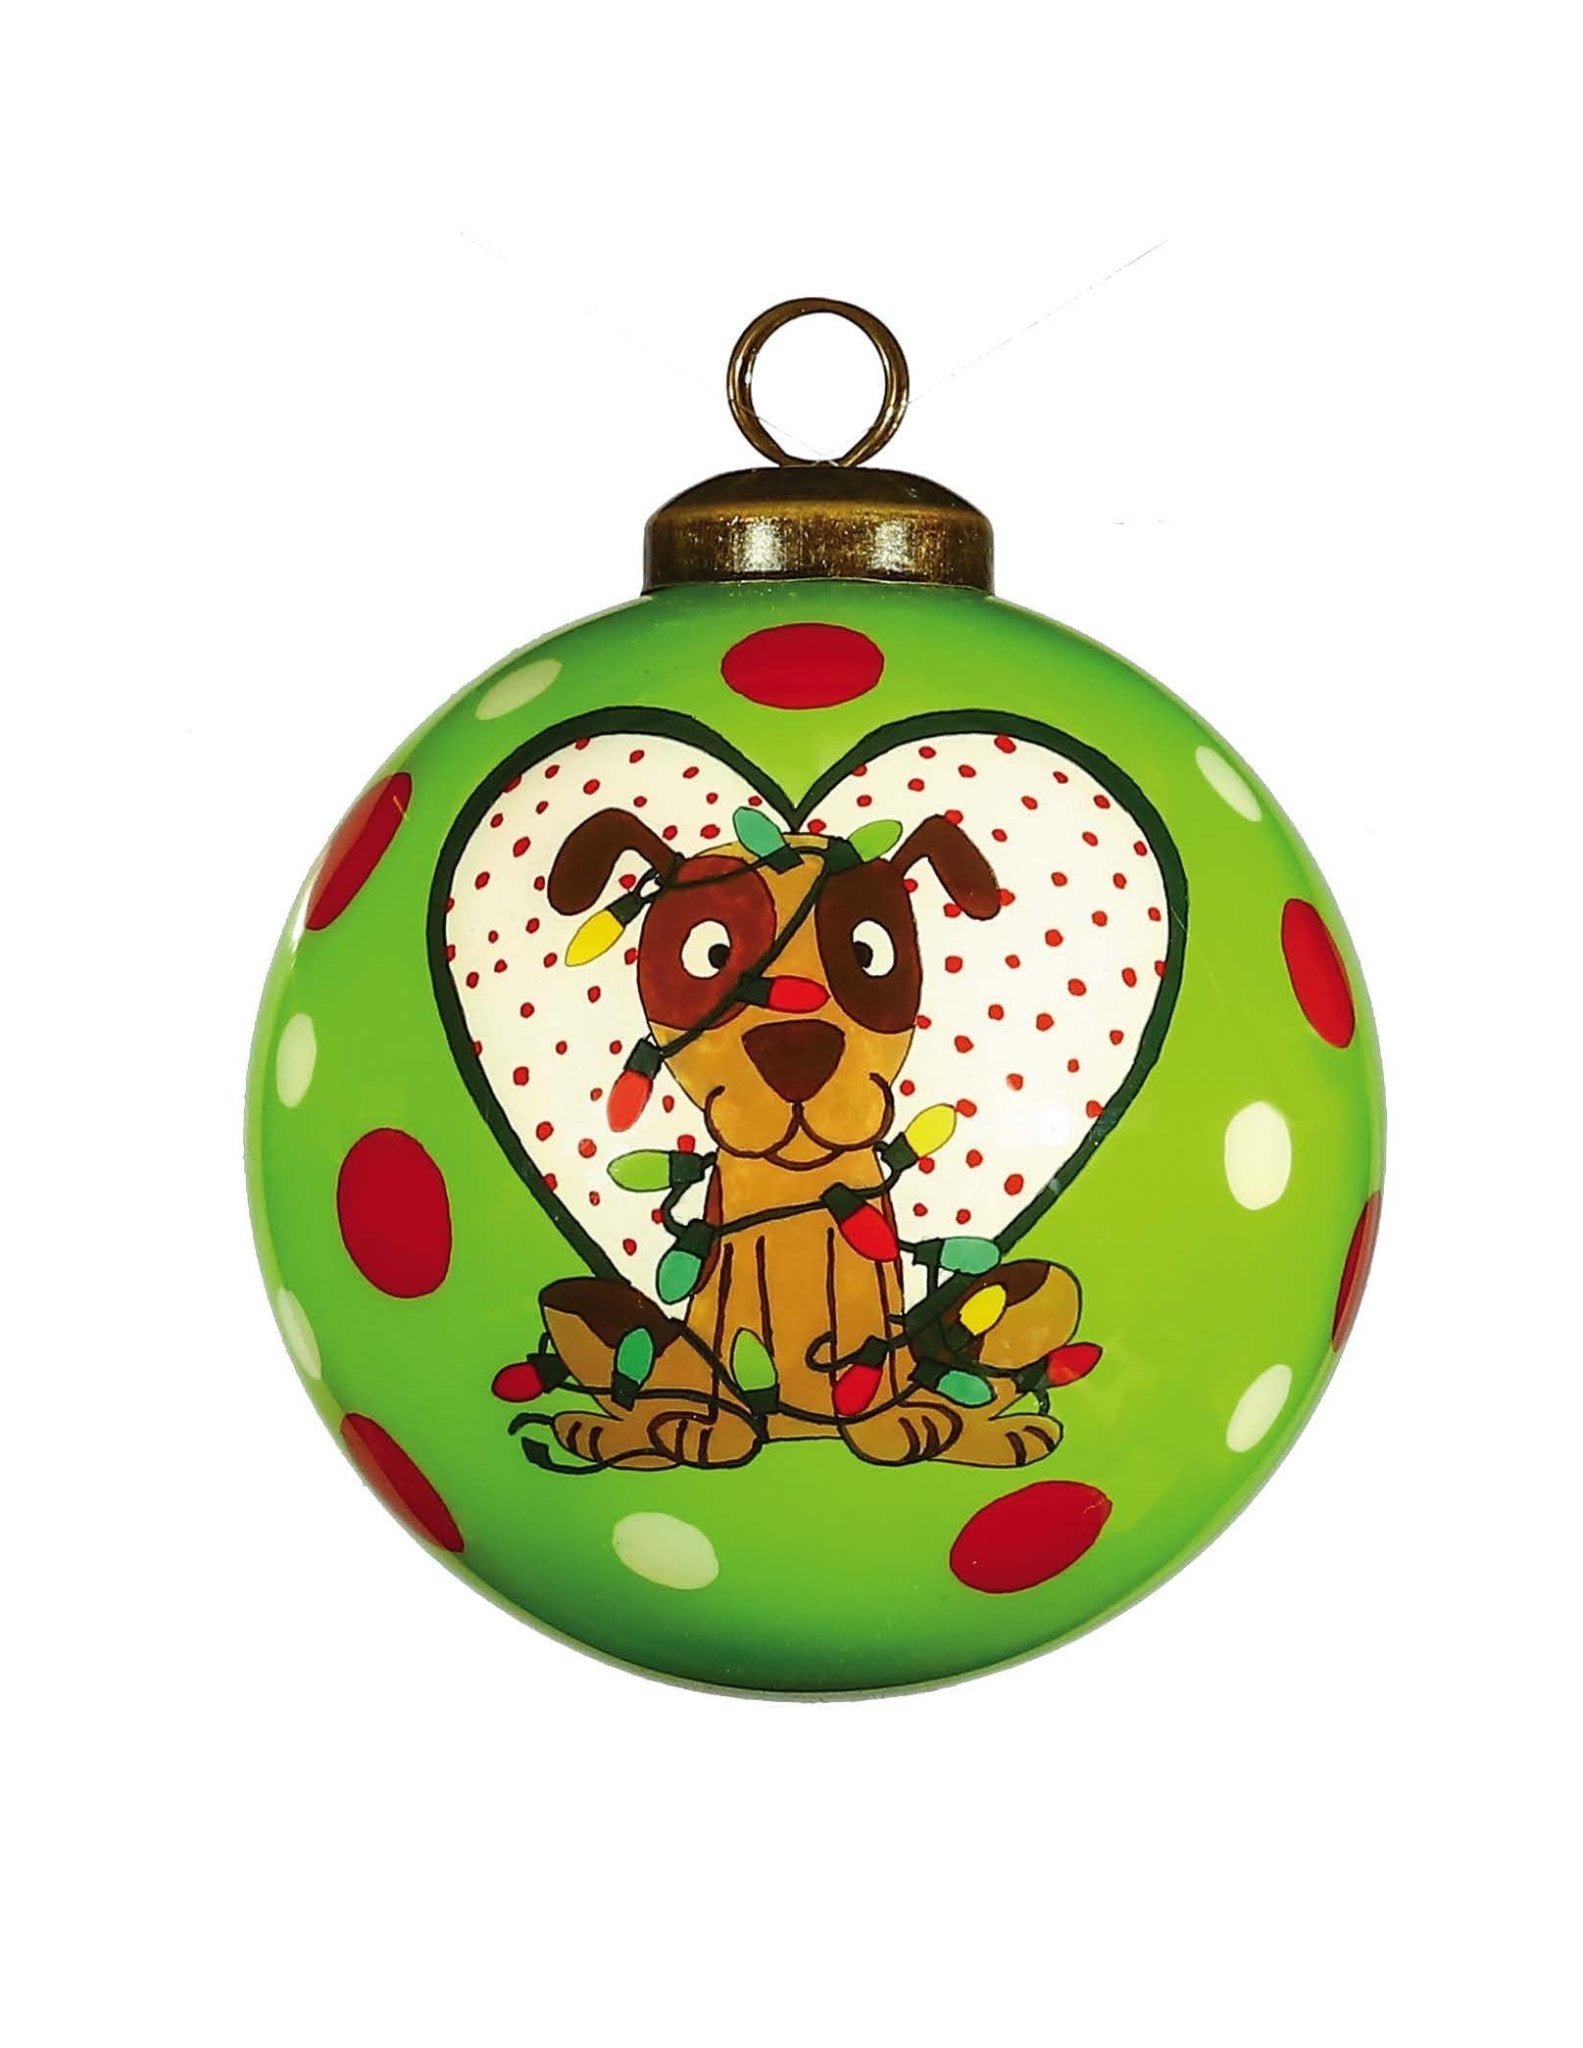 Charming-Dog-in-a-Heart-Hand-Painted-Mouth-Blown-Glass-Ornament-Christmas-Ornaments